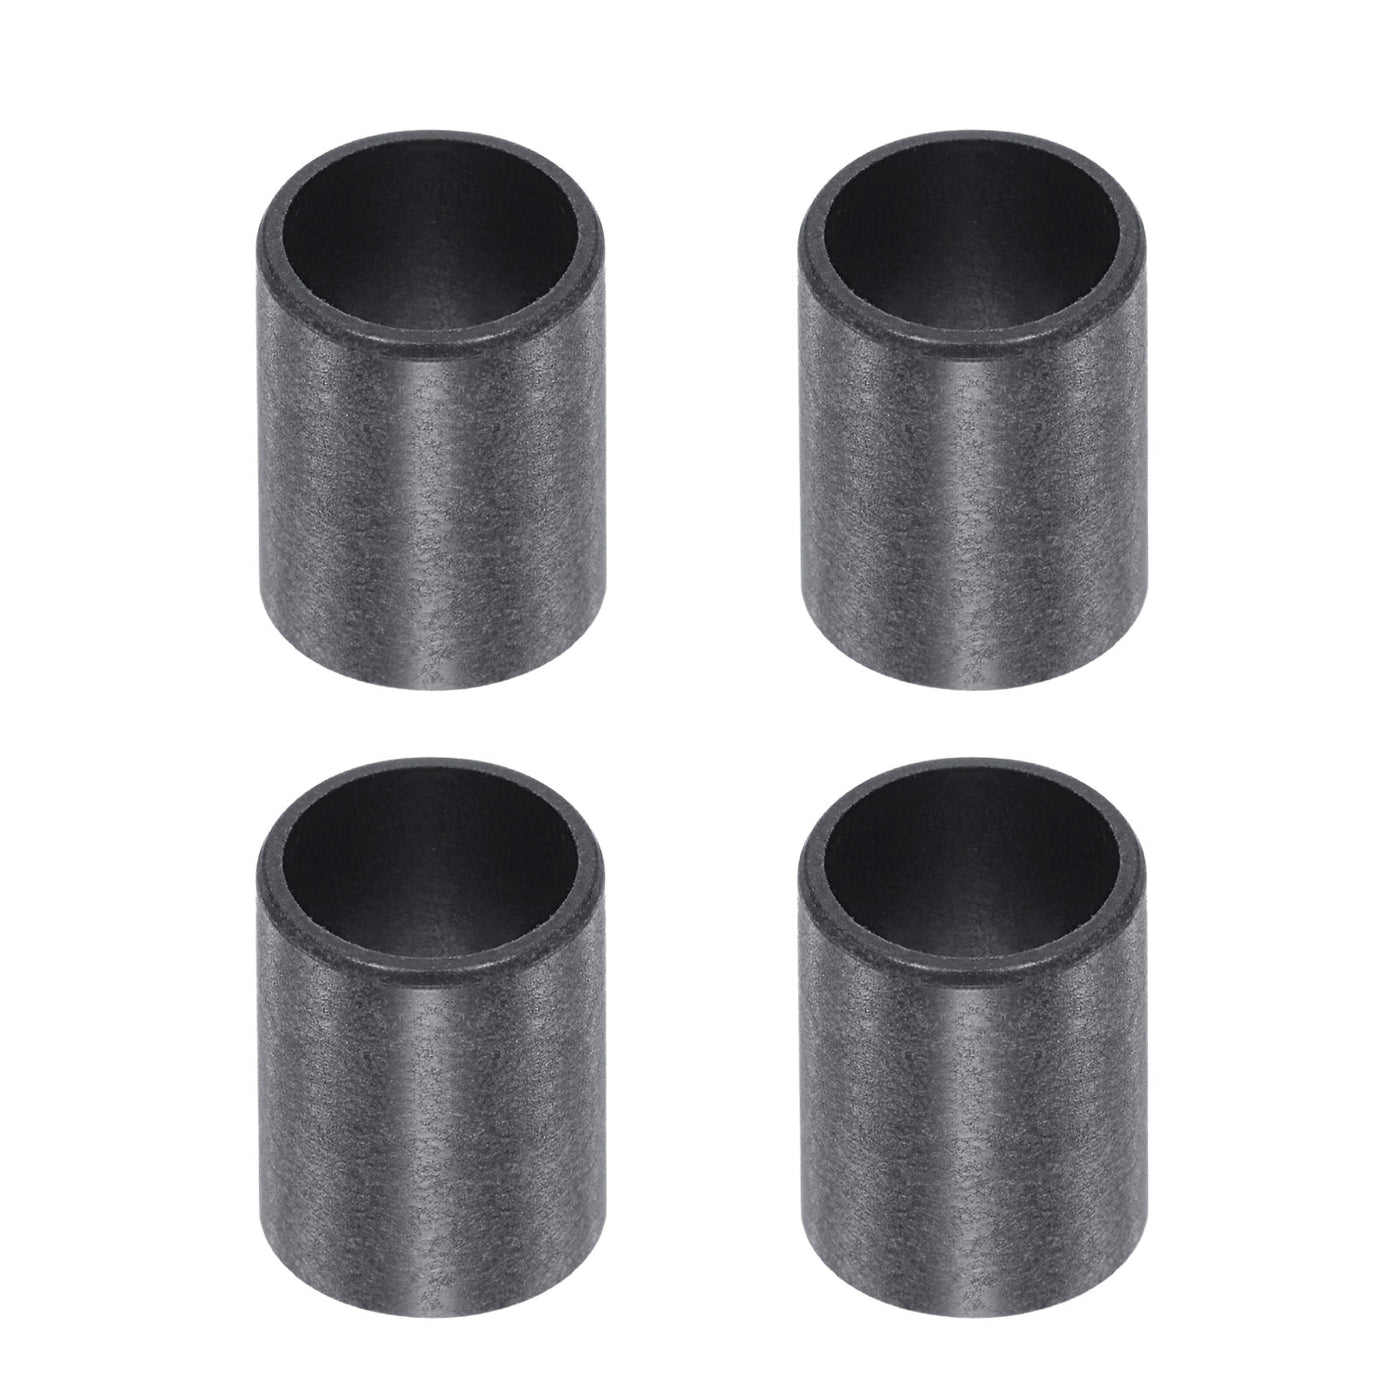 uxcell Uxcell Sleeve Bearings 10mmx12mmx17mm POM Wrapped Oilless Bushings Black 4pcs